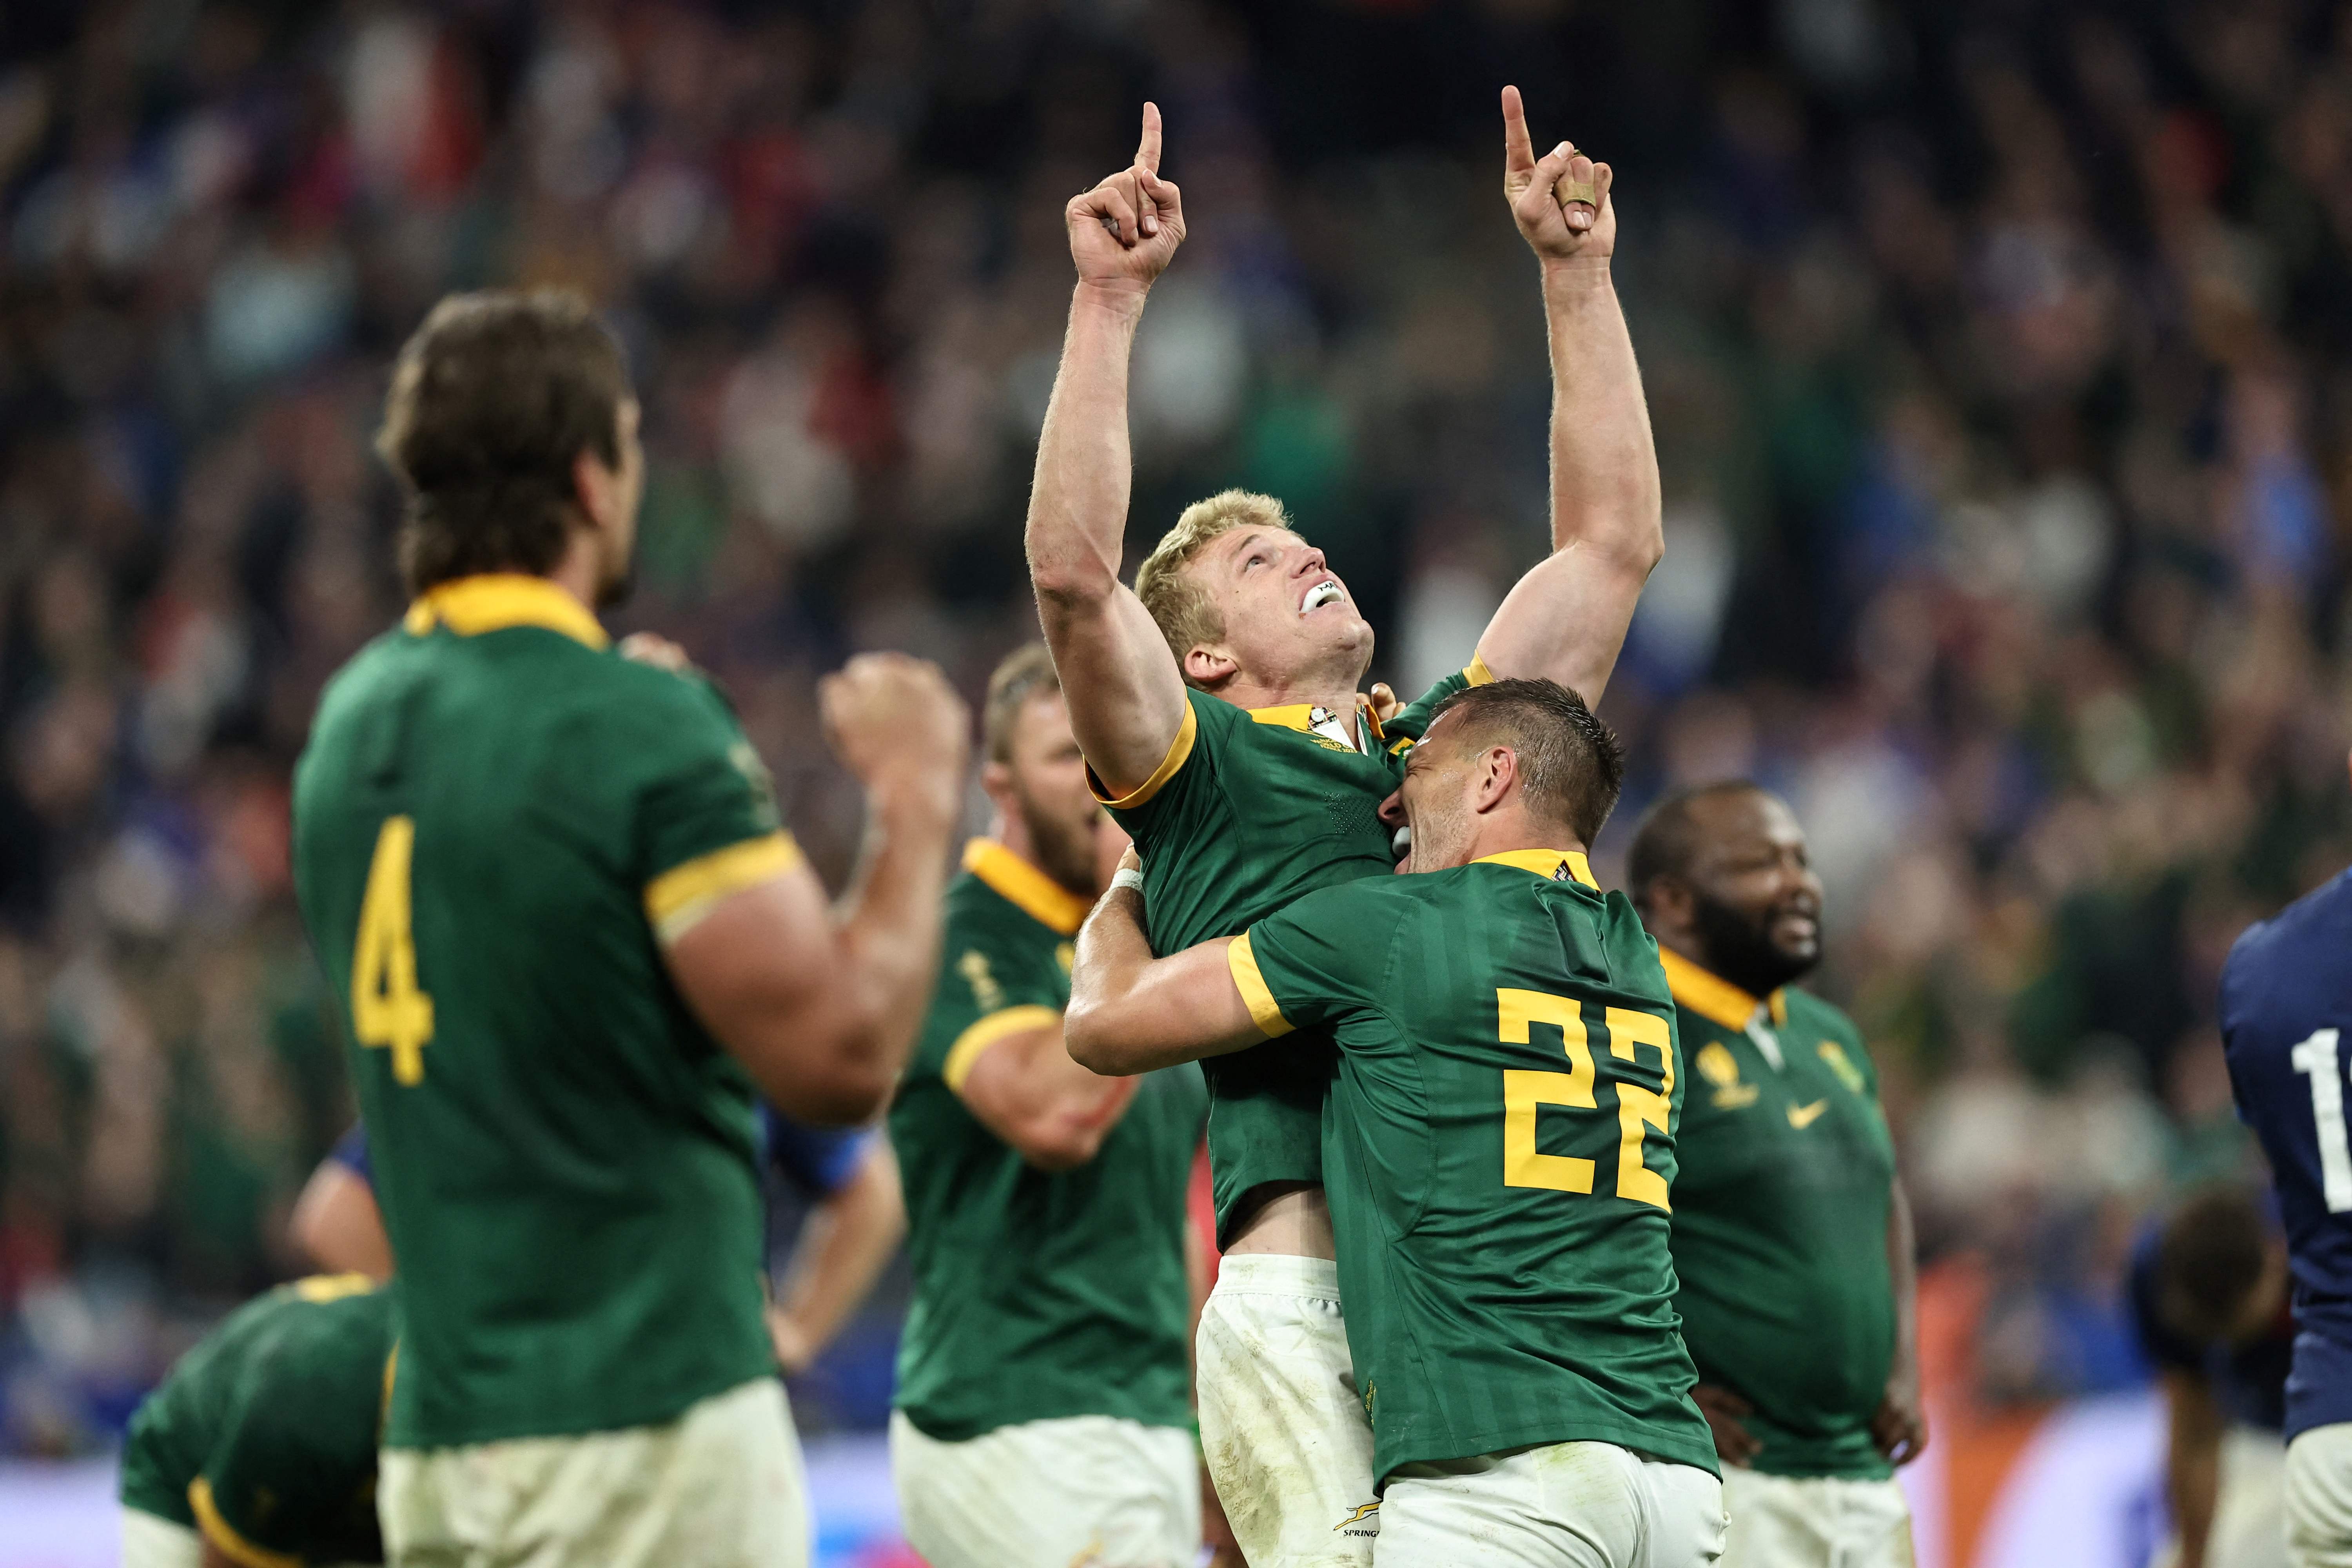 South Africa look set to be celebrating once more come Saturday evening